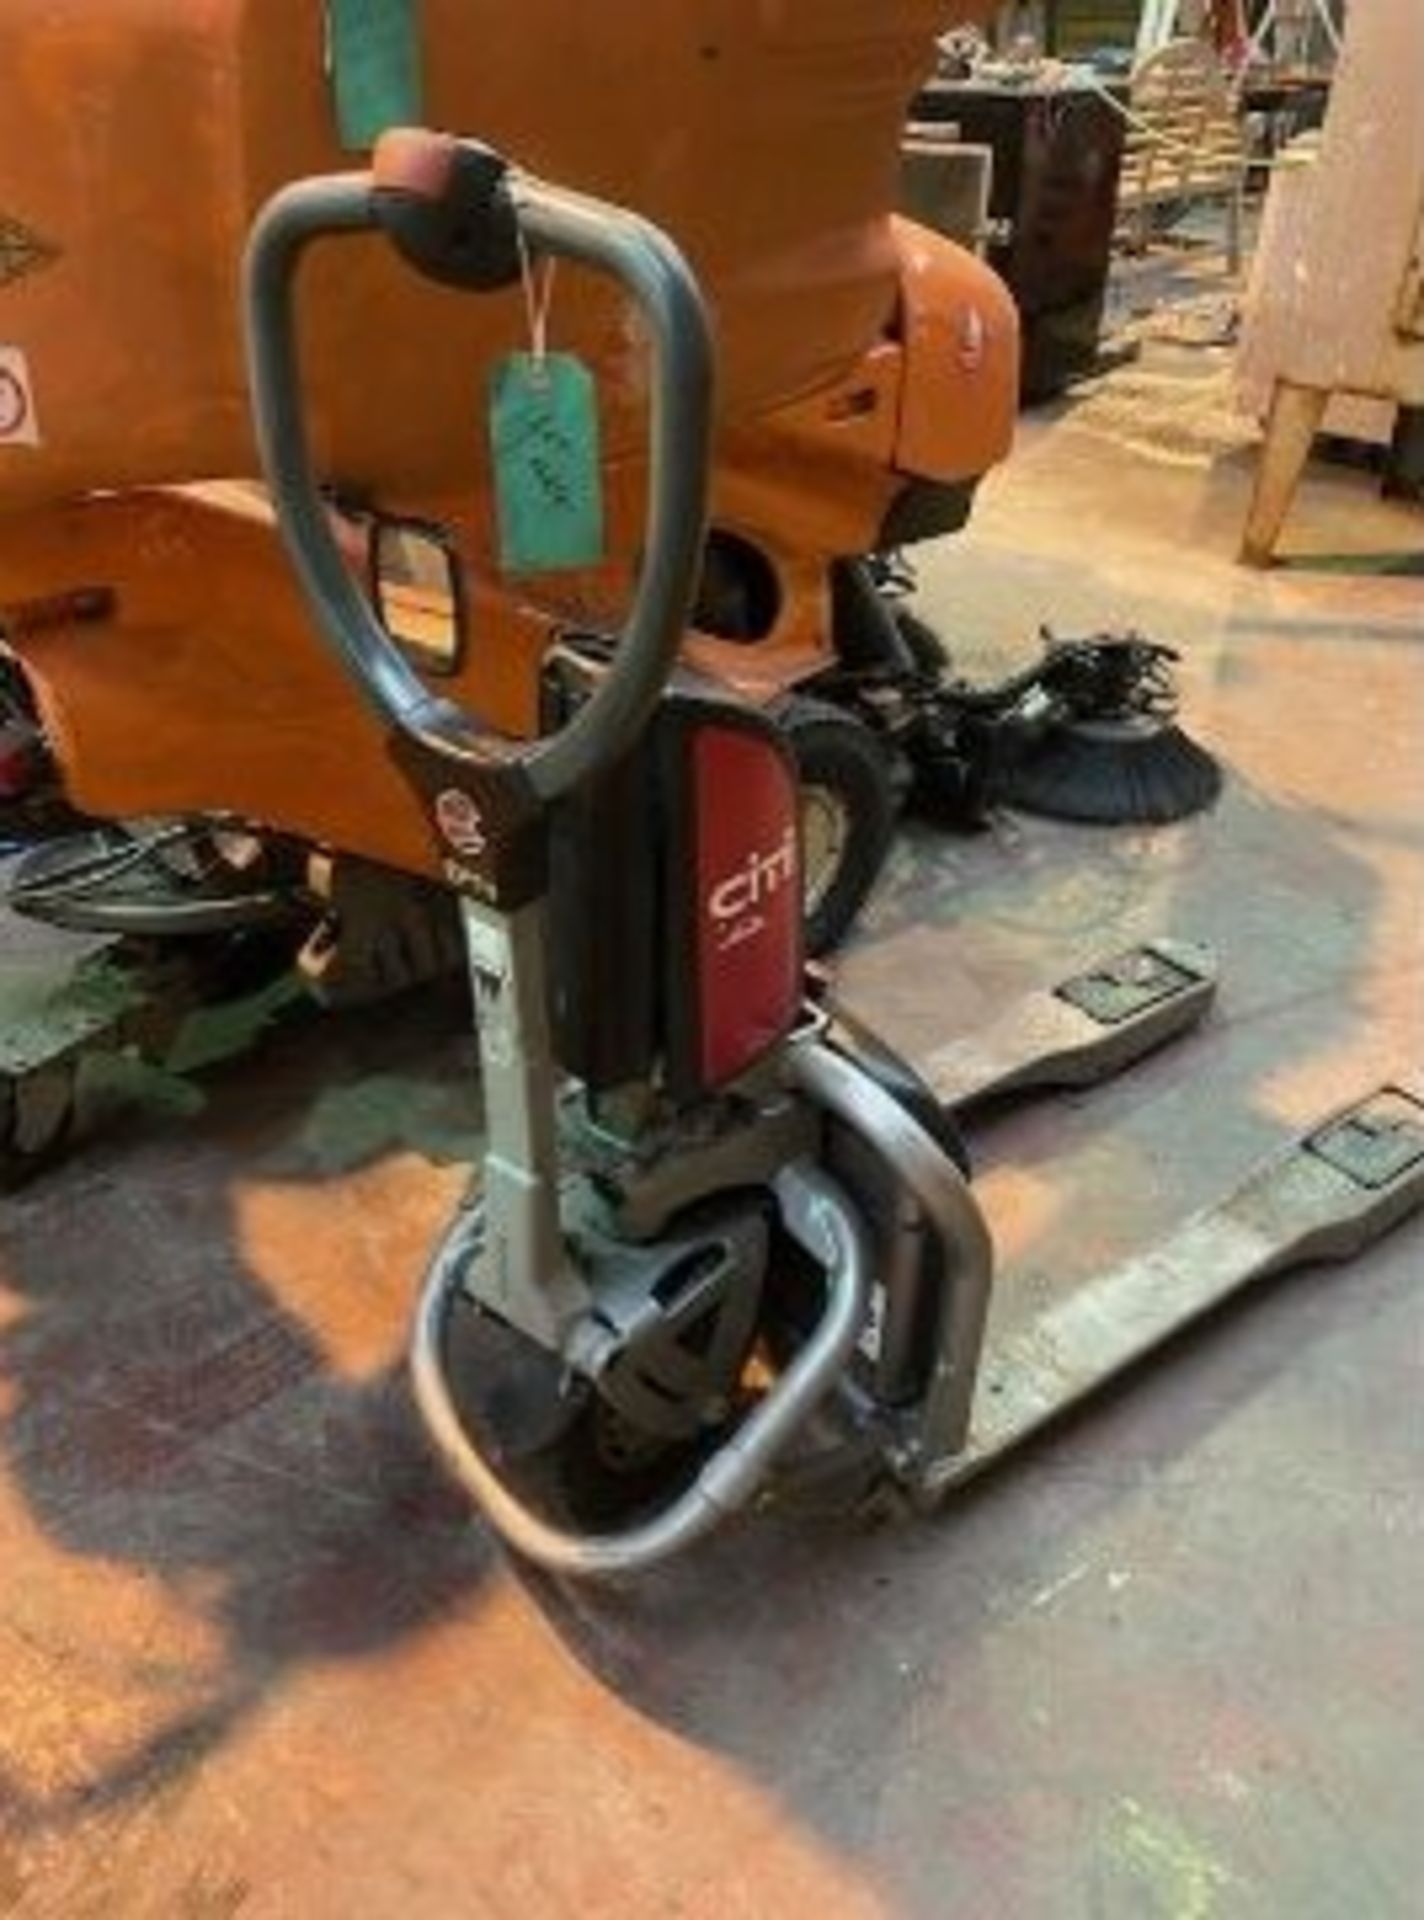 Linde City Pallet truck battery operated but no battery included